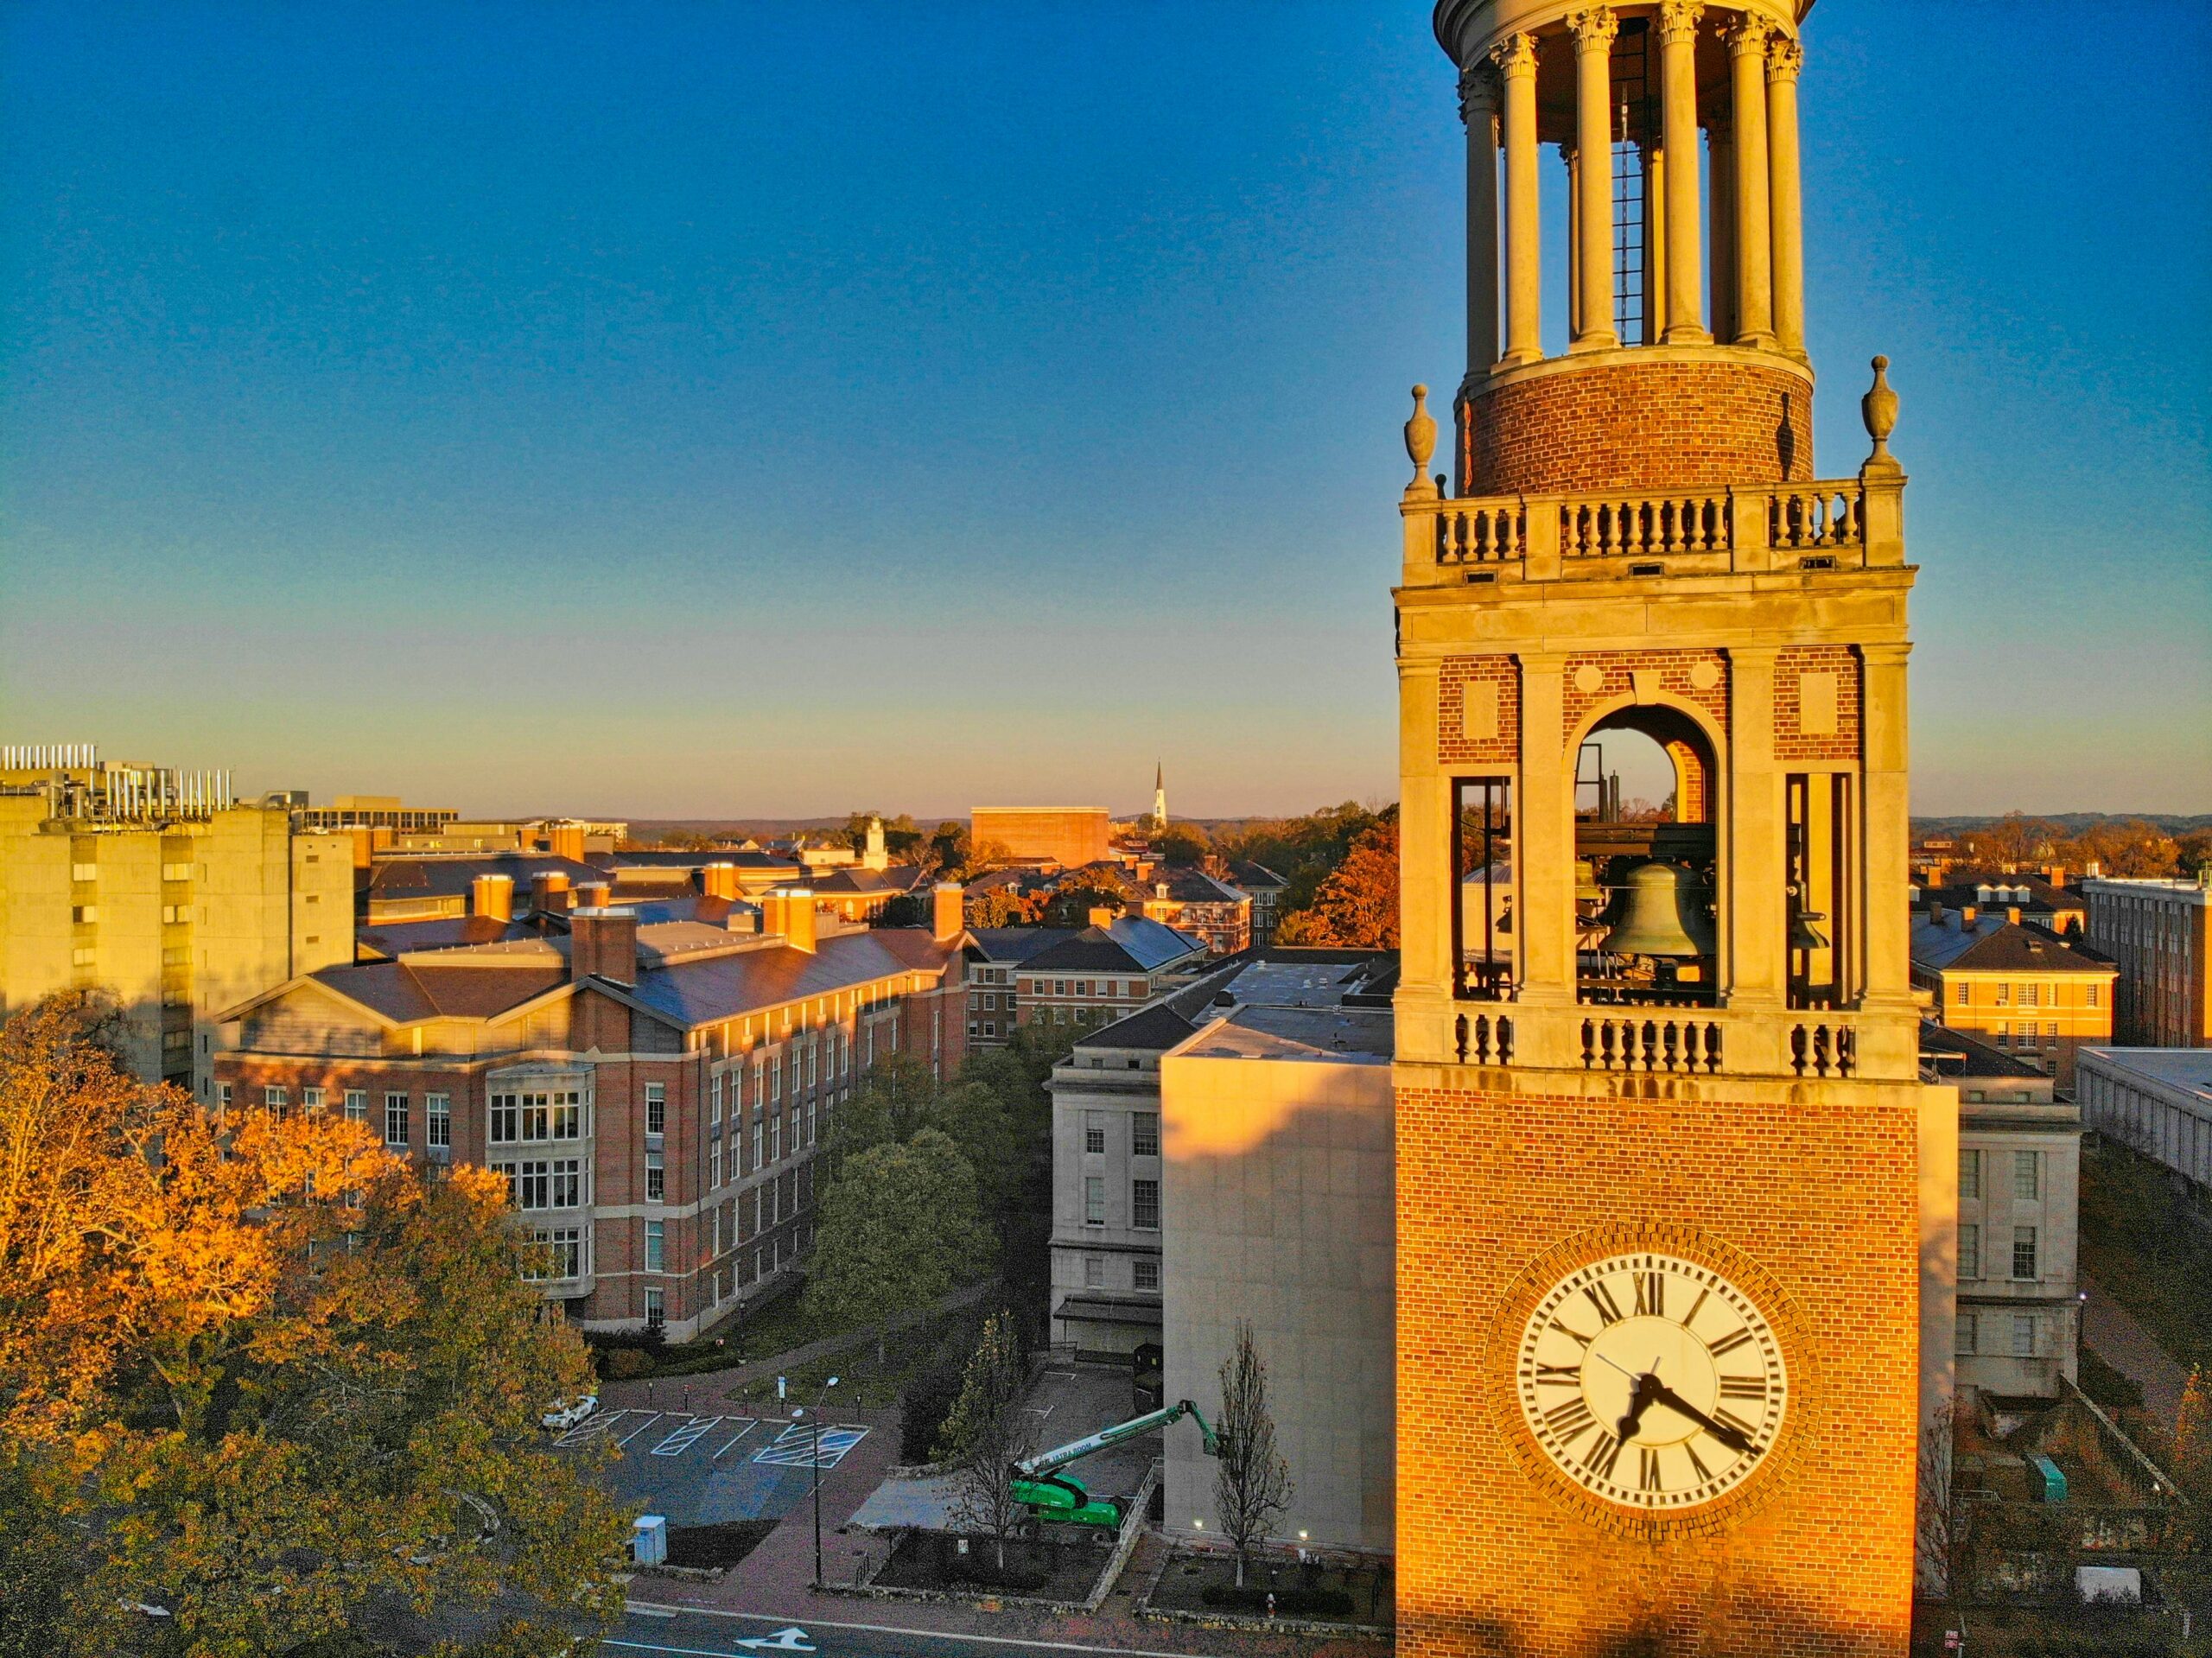 Stock Image from Unsplash of Bell Tower on UNC Chapel Hill campus